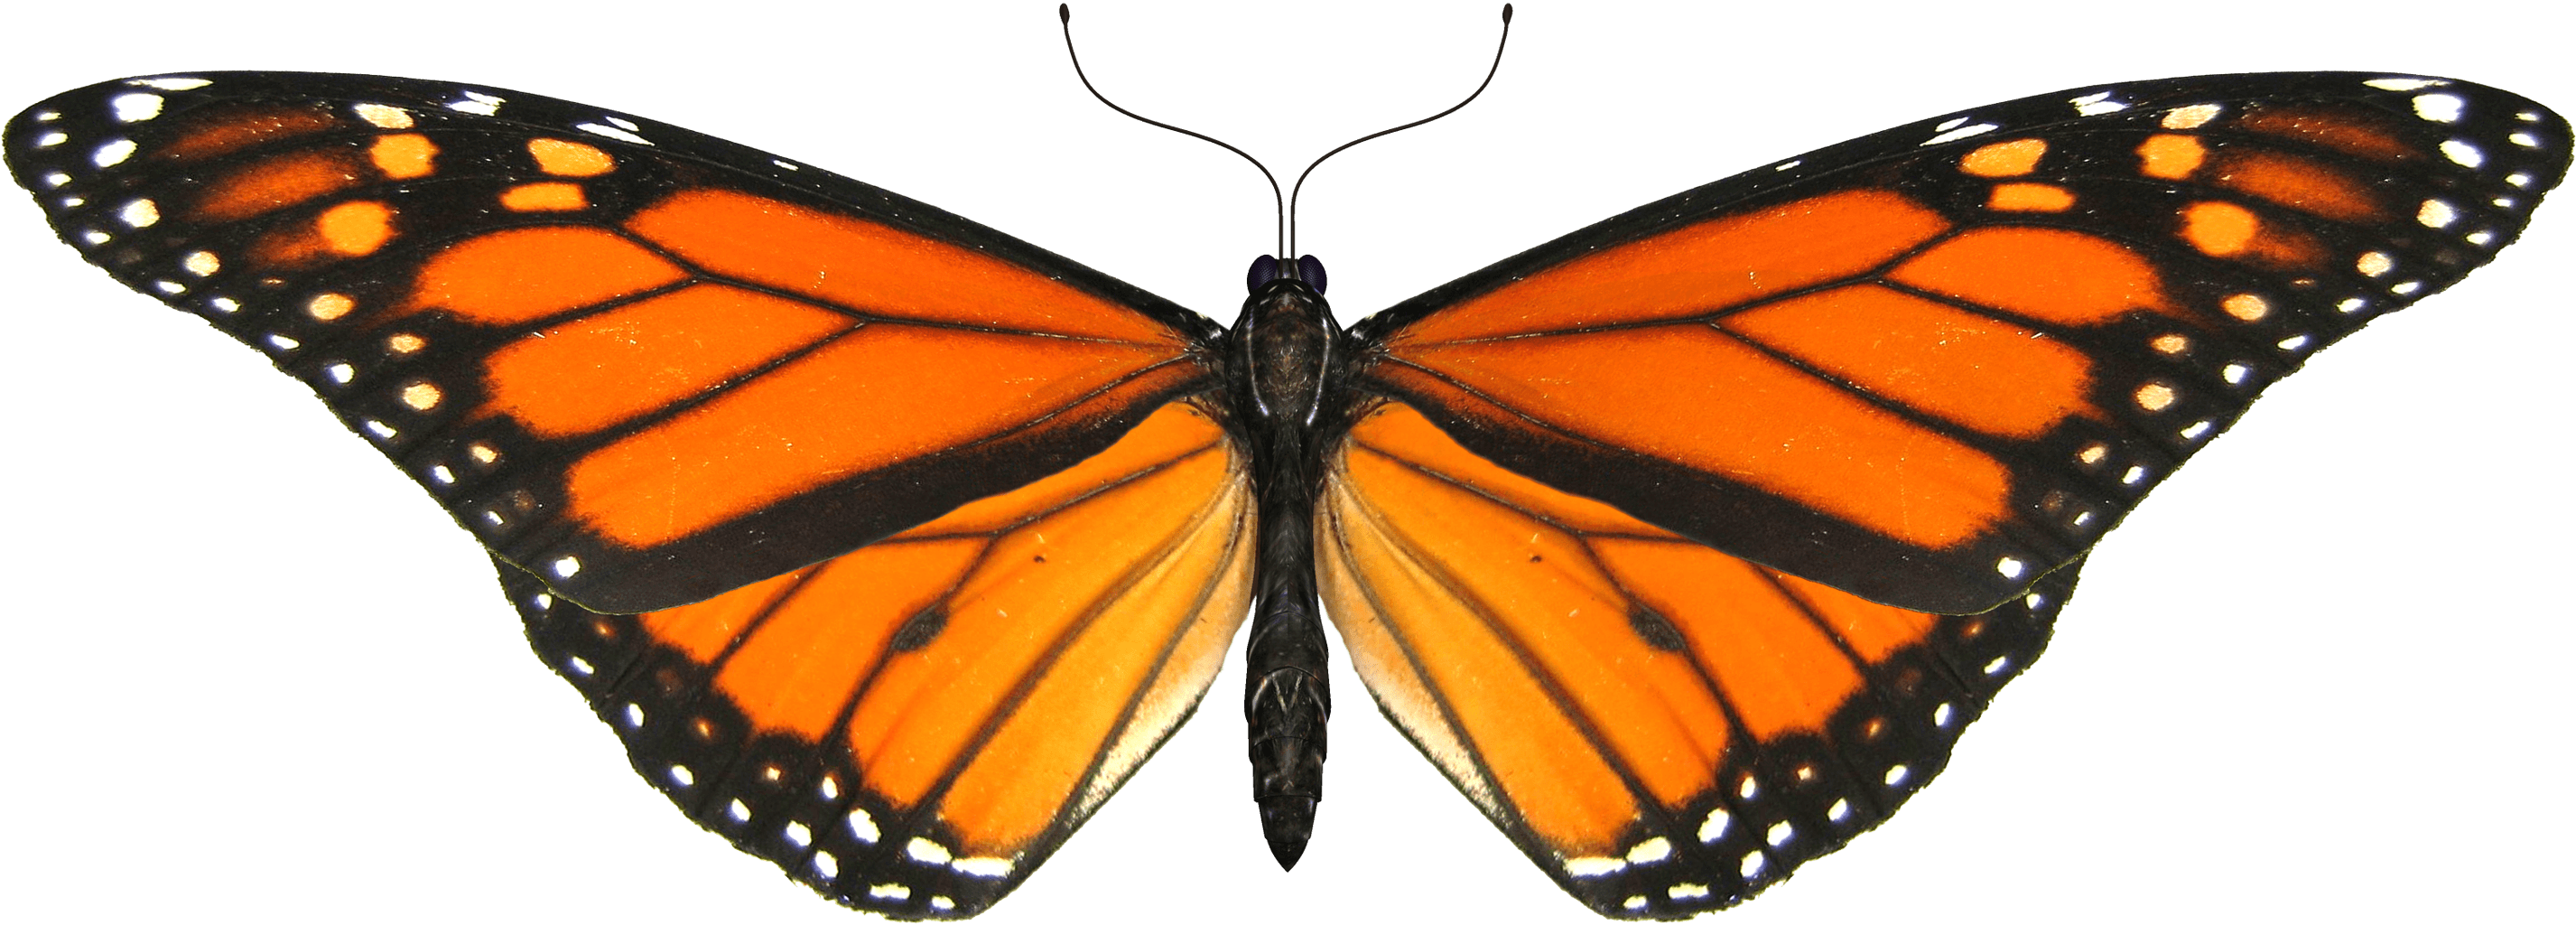 Monarch Butterfly Cartoon Clipartsco - Monarch Butterfly Transparent Background (1600x1200)